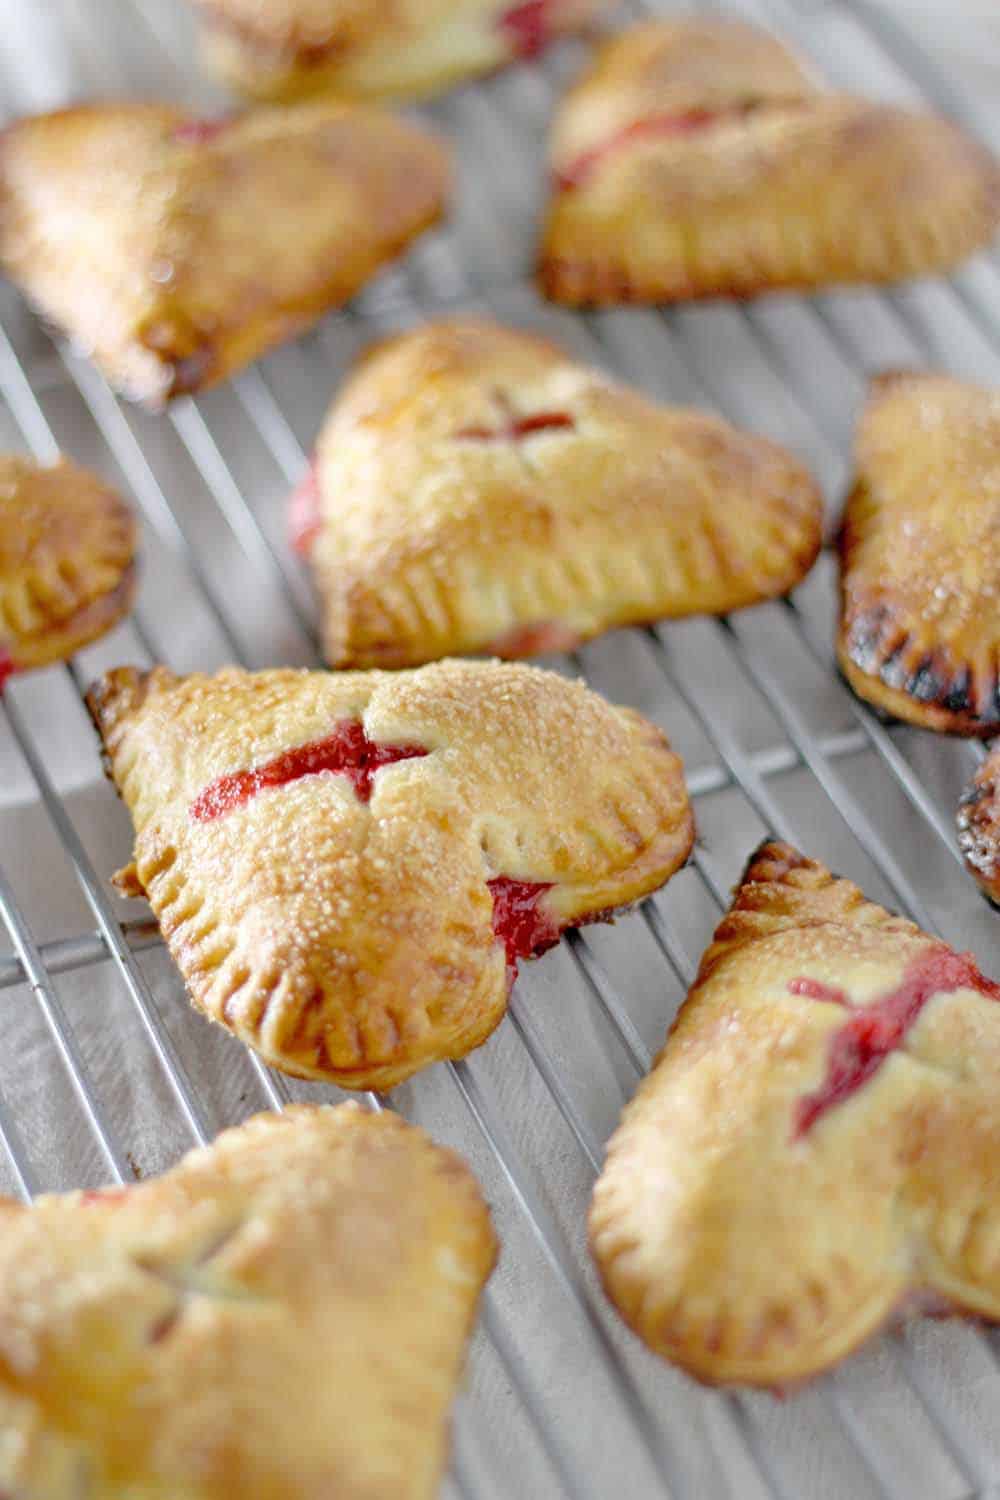 Several strawberry ginger hand pies on a wire cooling rack.